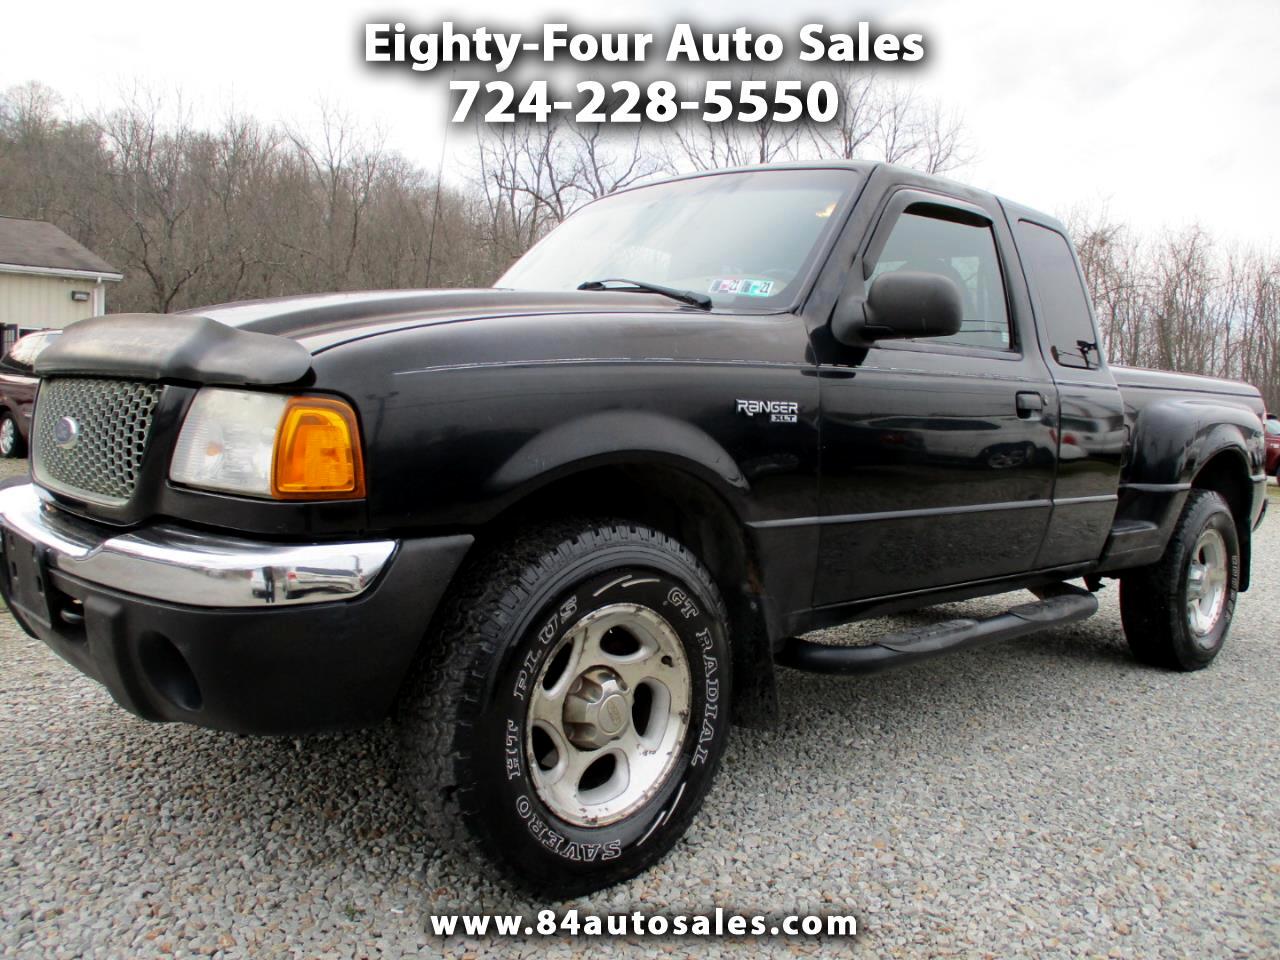 Ford Ranger Supercab 4.0L XLT Off-Rd 4WD w/391A 2001